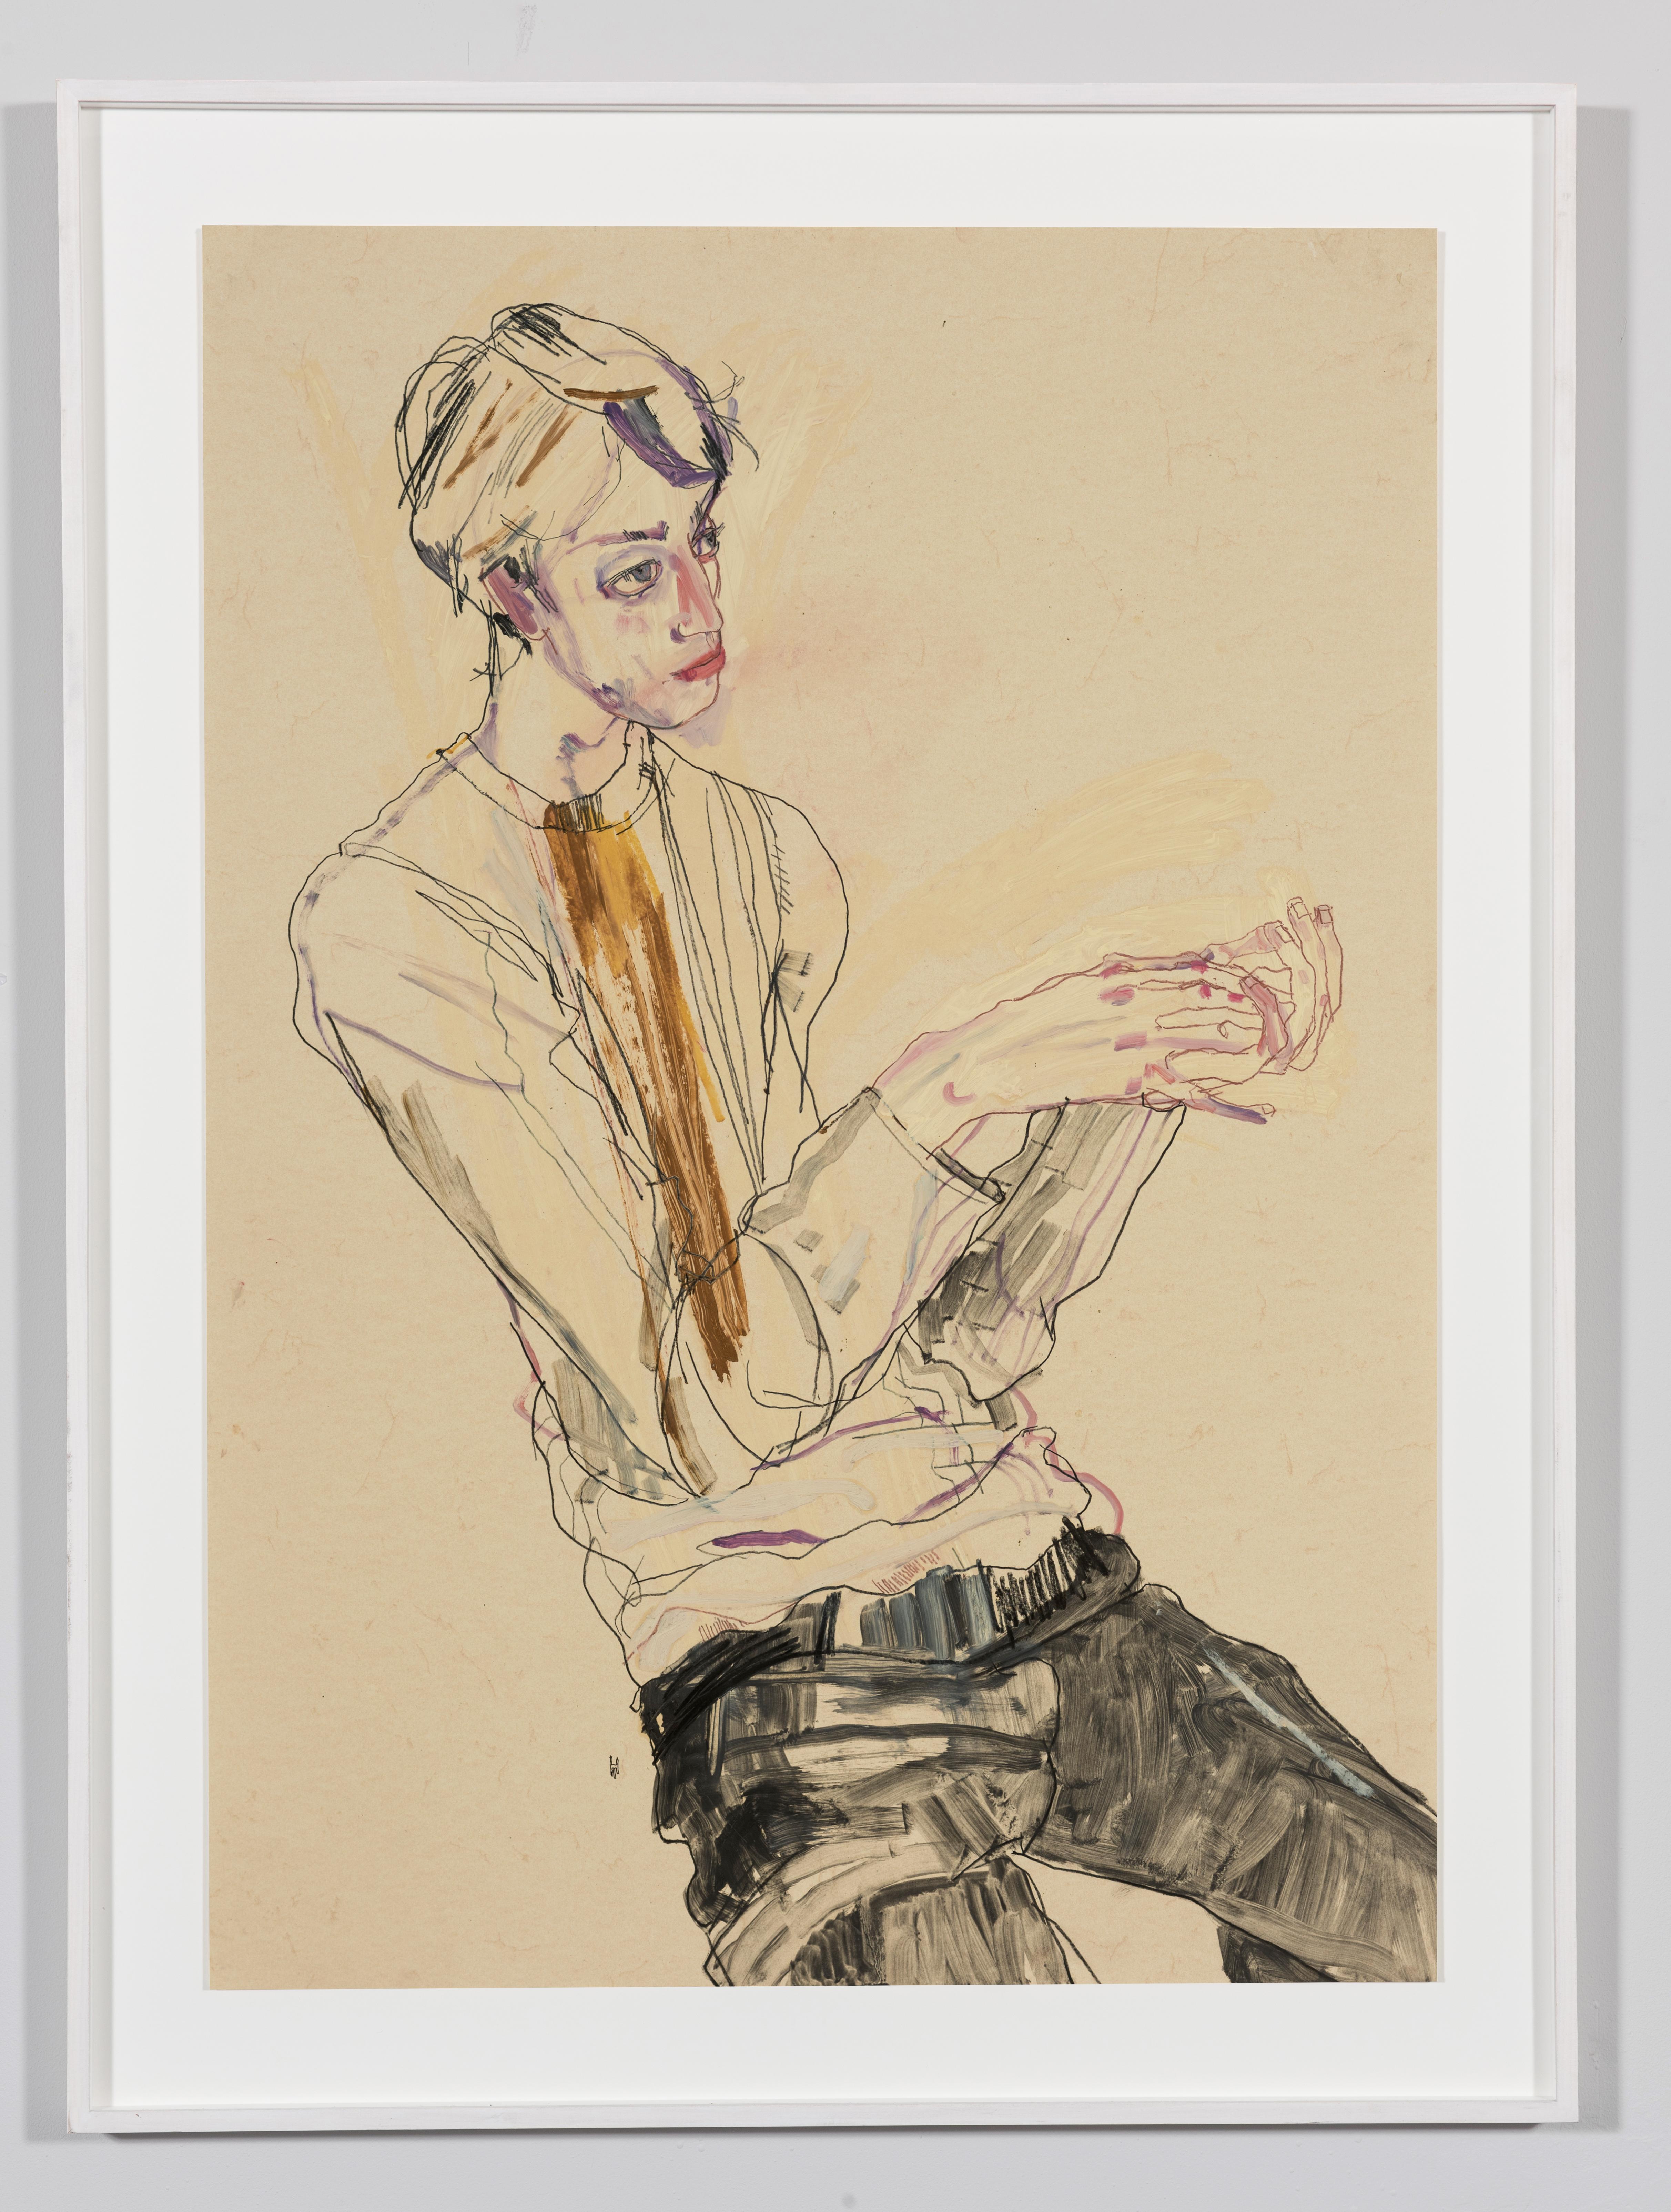 Ben Waters (Seated, Hand Holding), Mixed media on Pergamenata parchment - Painting by Howard Tangye